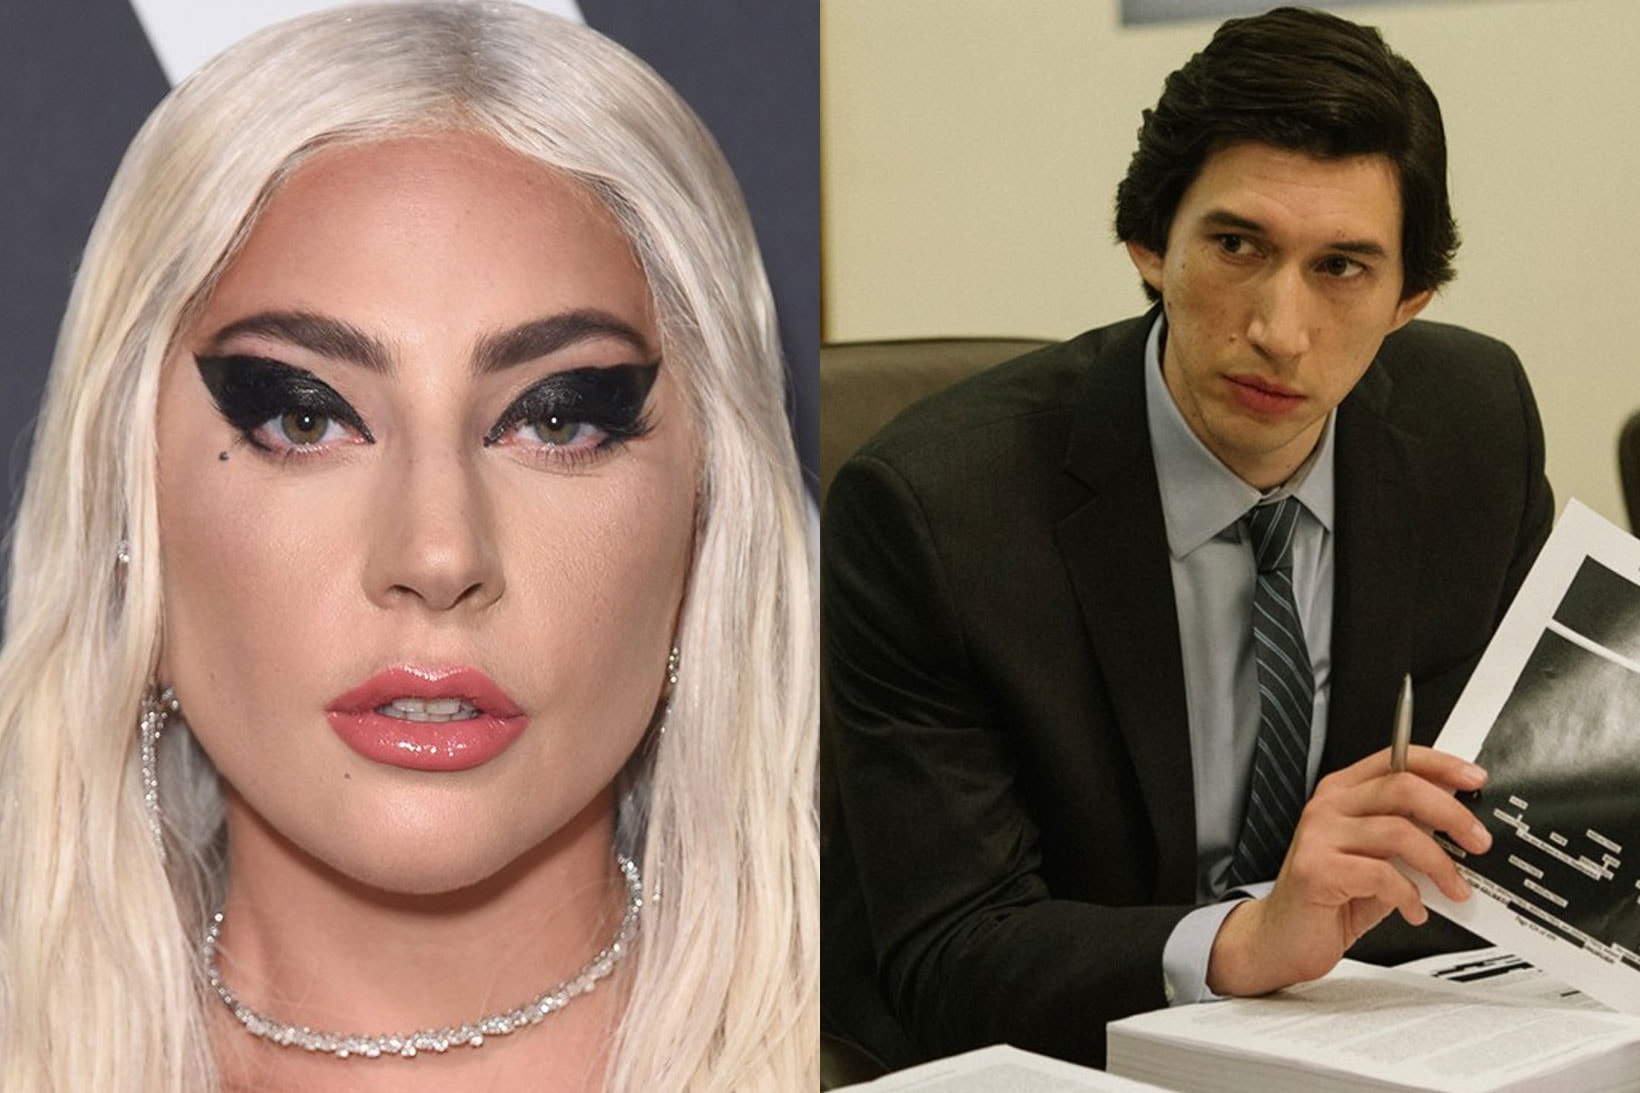 house of gucci lady gaga adam driver ridley scott thriller crime movie film first look release date info